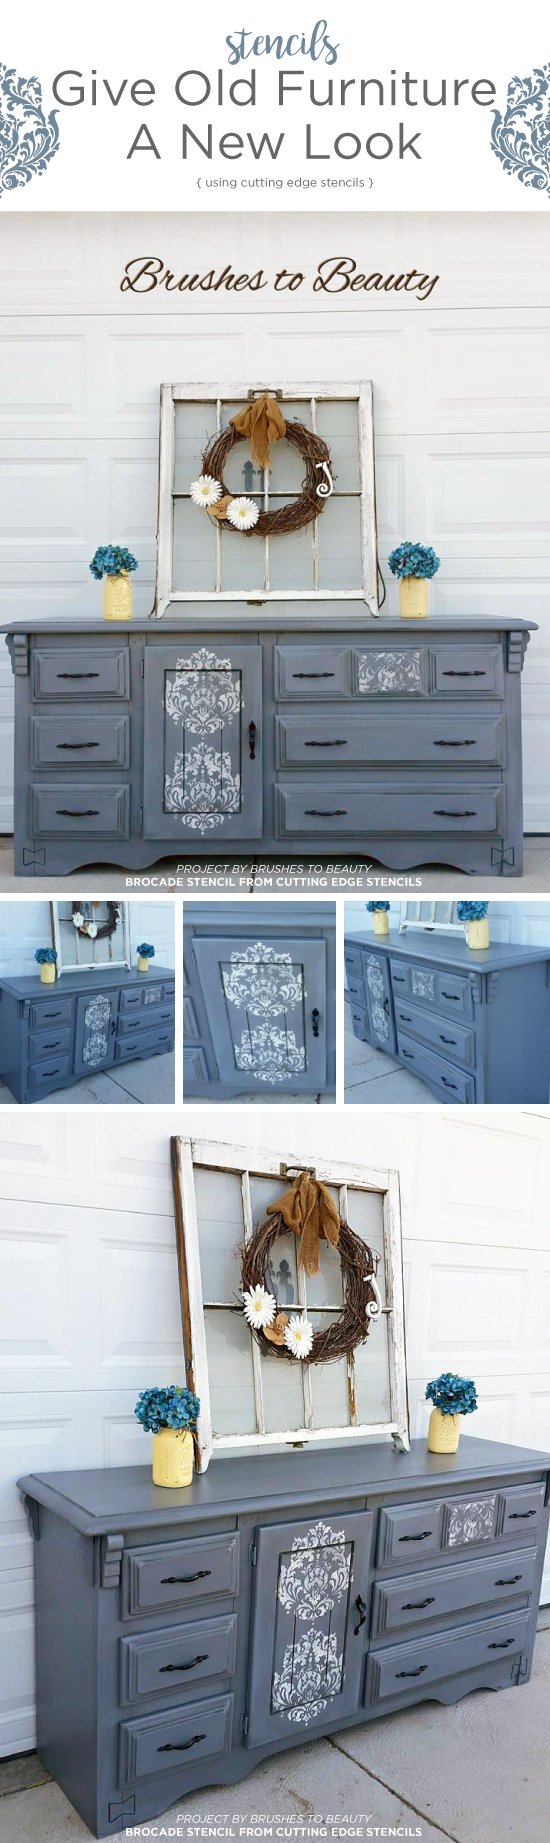 Cutting Edge Stencils shares a DIY painted and stenciled dresser project using the Brocade No. 1 Stencil.  http://www.cuttingedgestencils.com/Brocade-stencil-damask.html